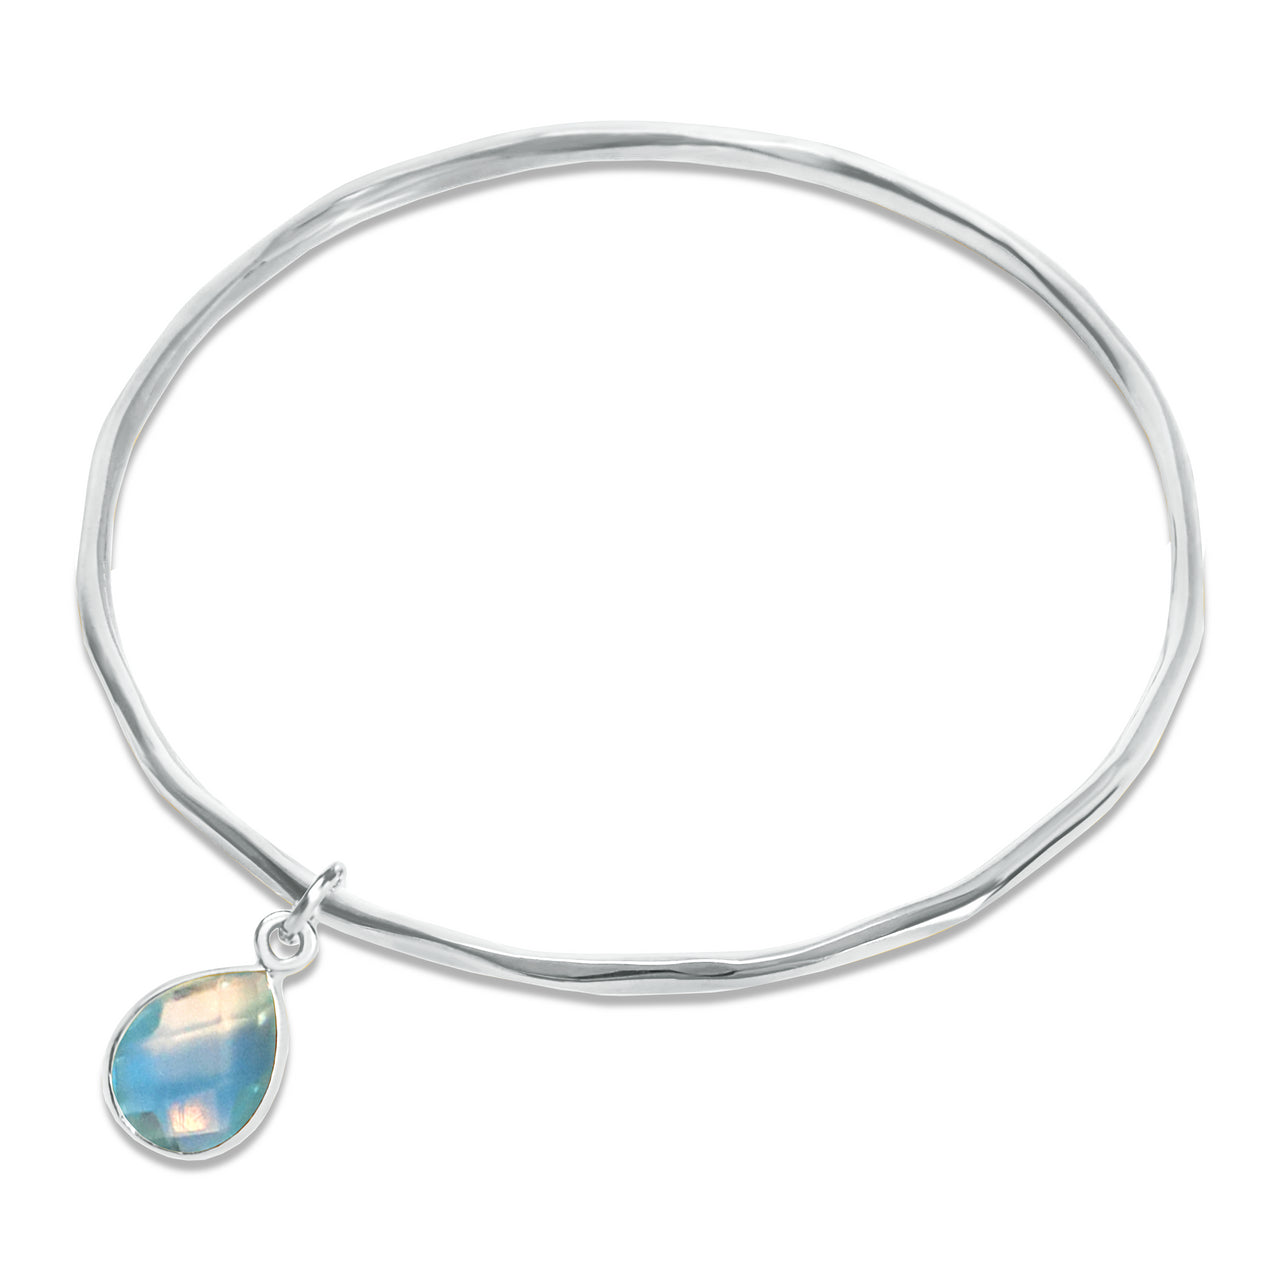 blue topaz charm bangle in silver on a white background